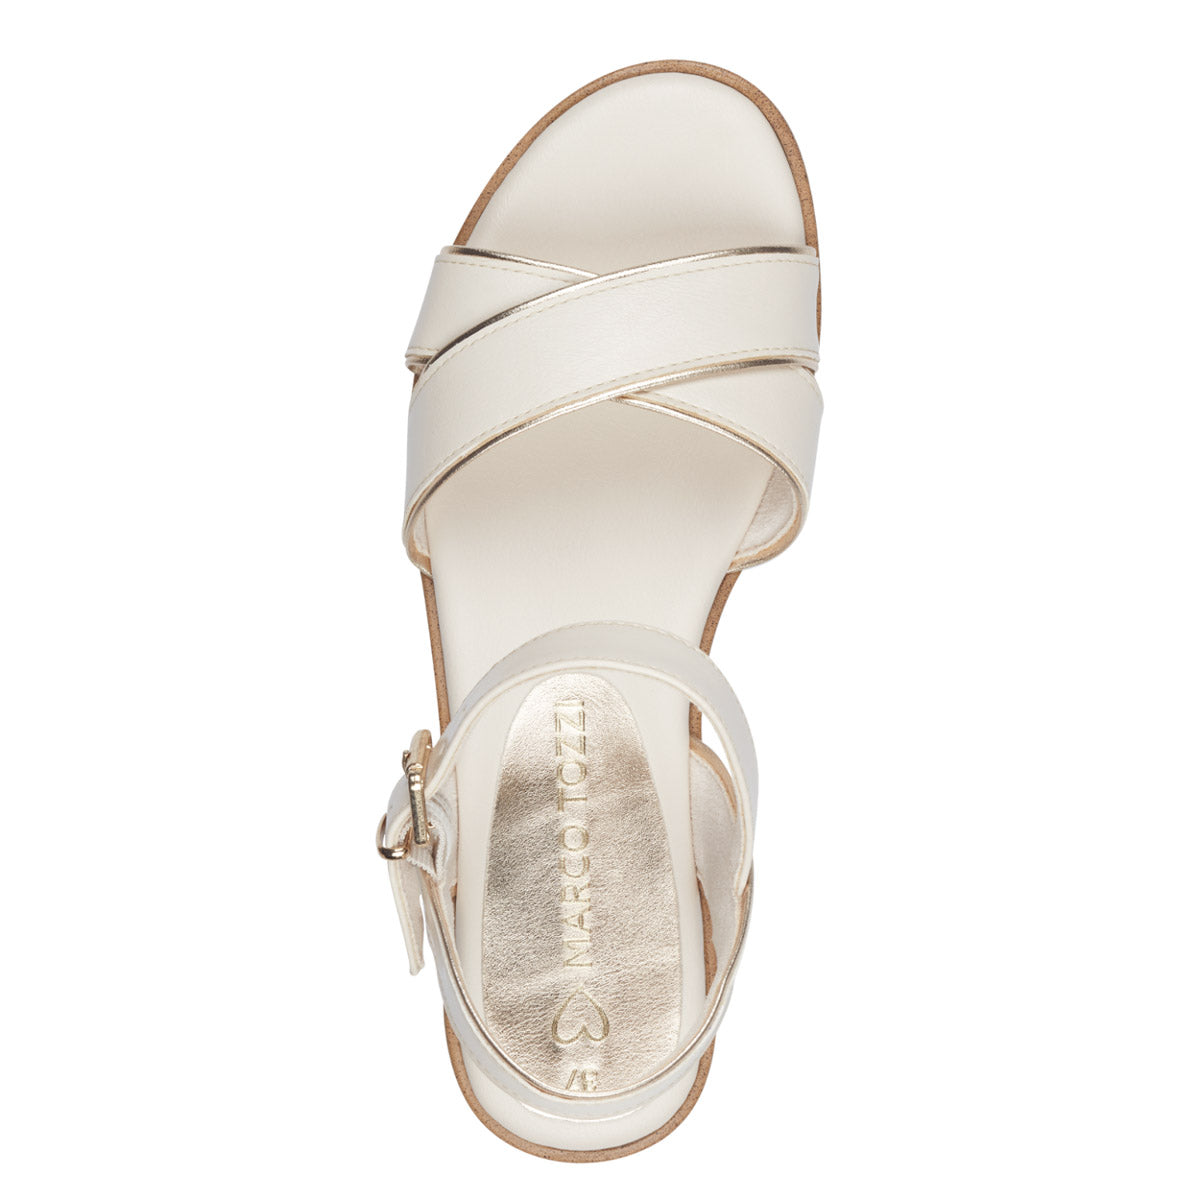 Marco Tozzi Cream-Coloured Vegan Sandal with Gold Buckle and Wedge Sole